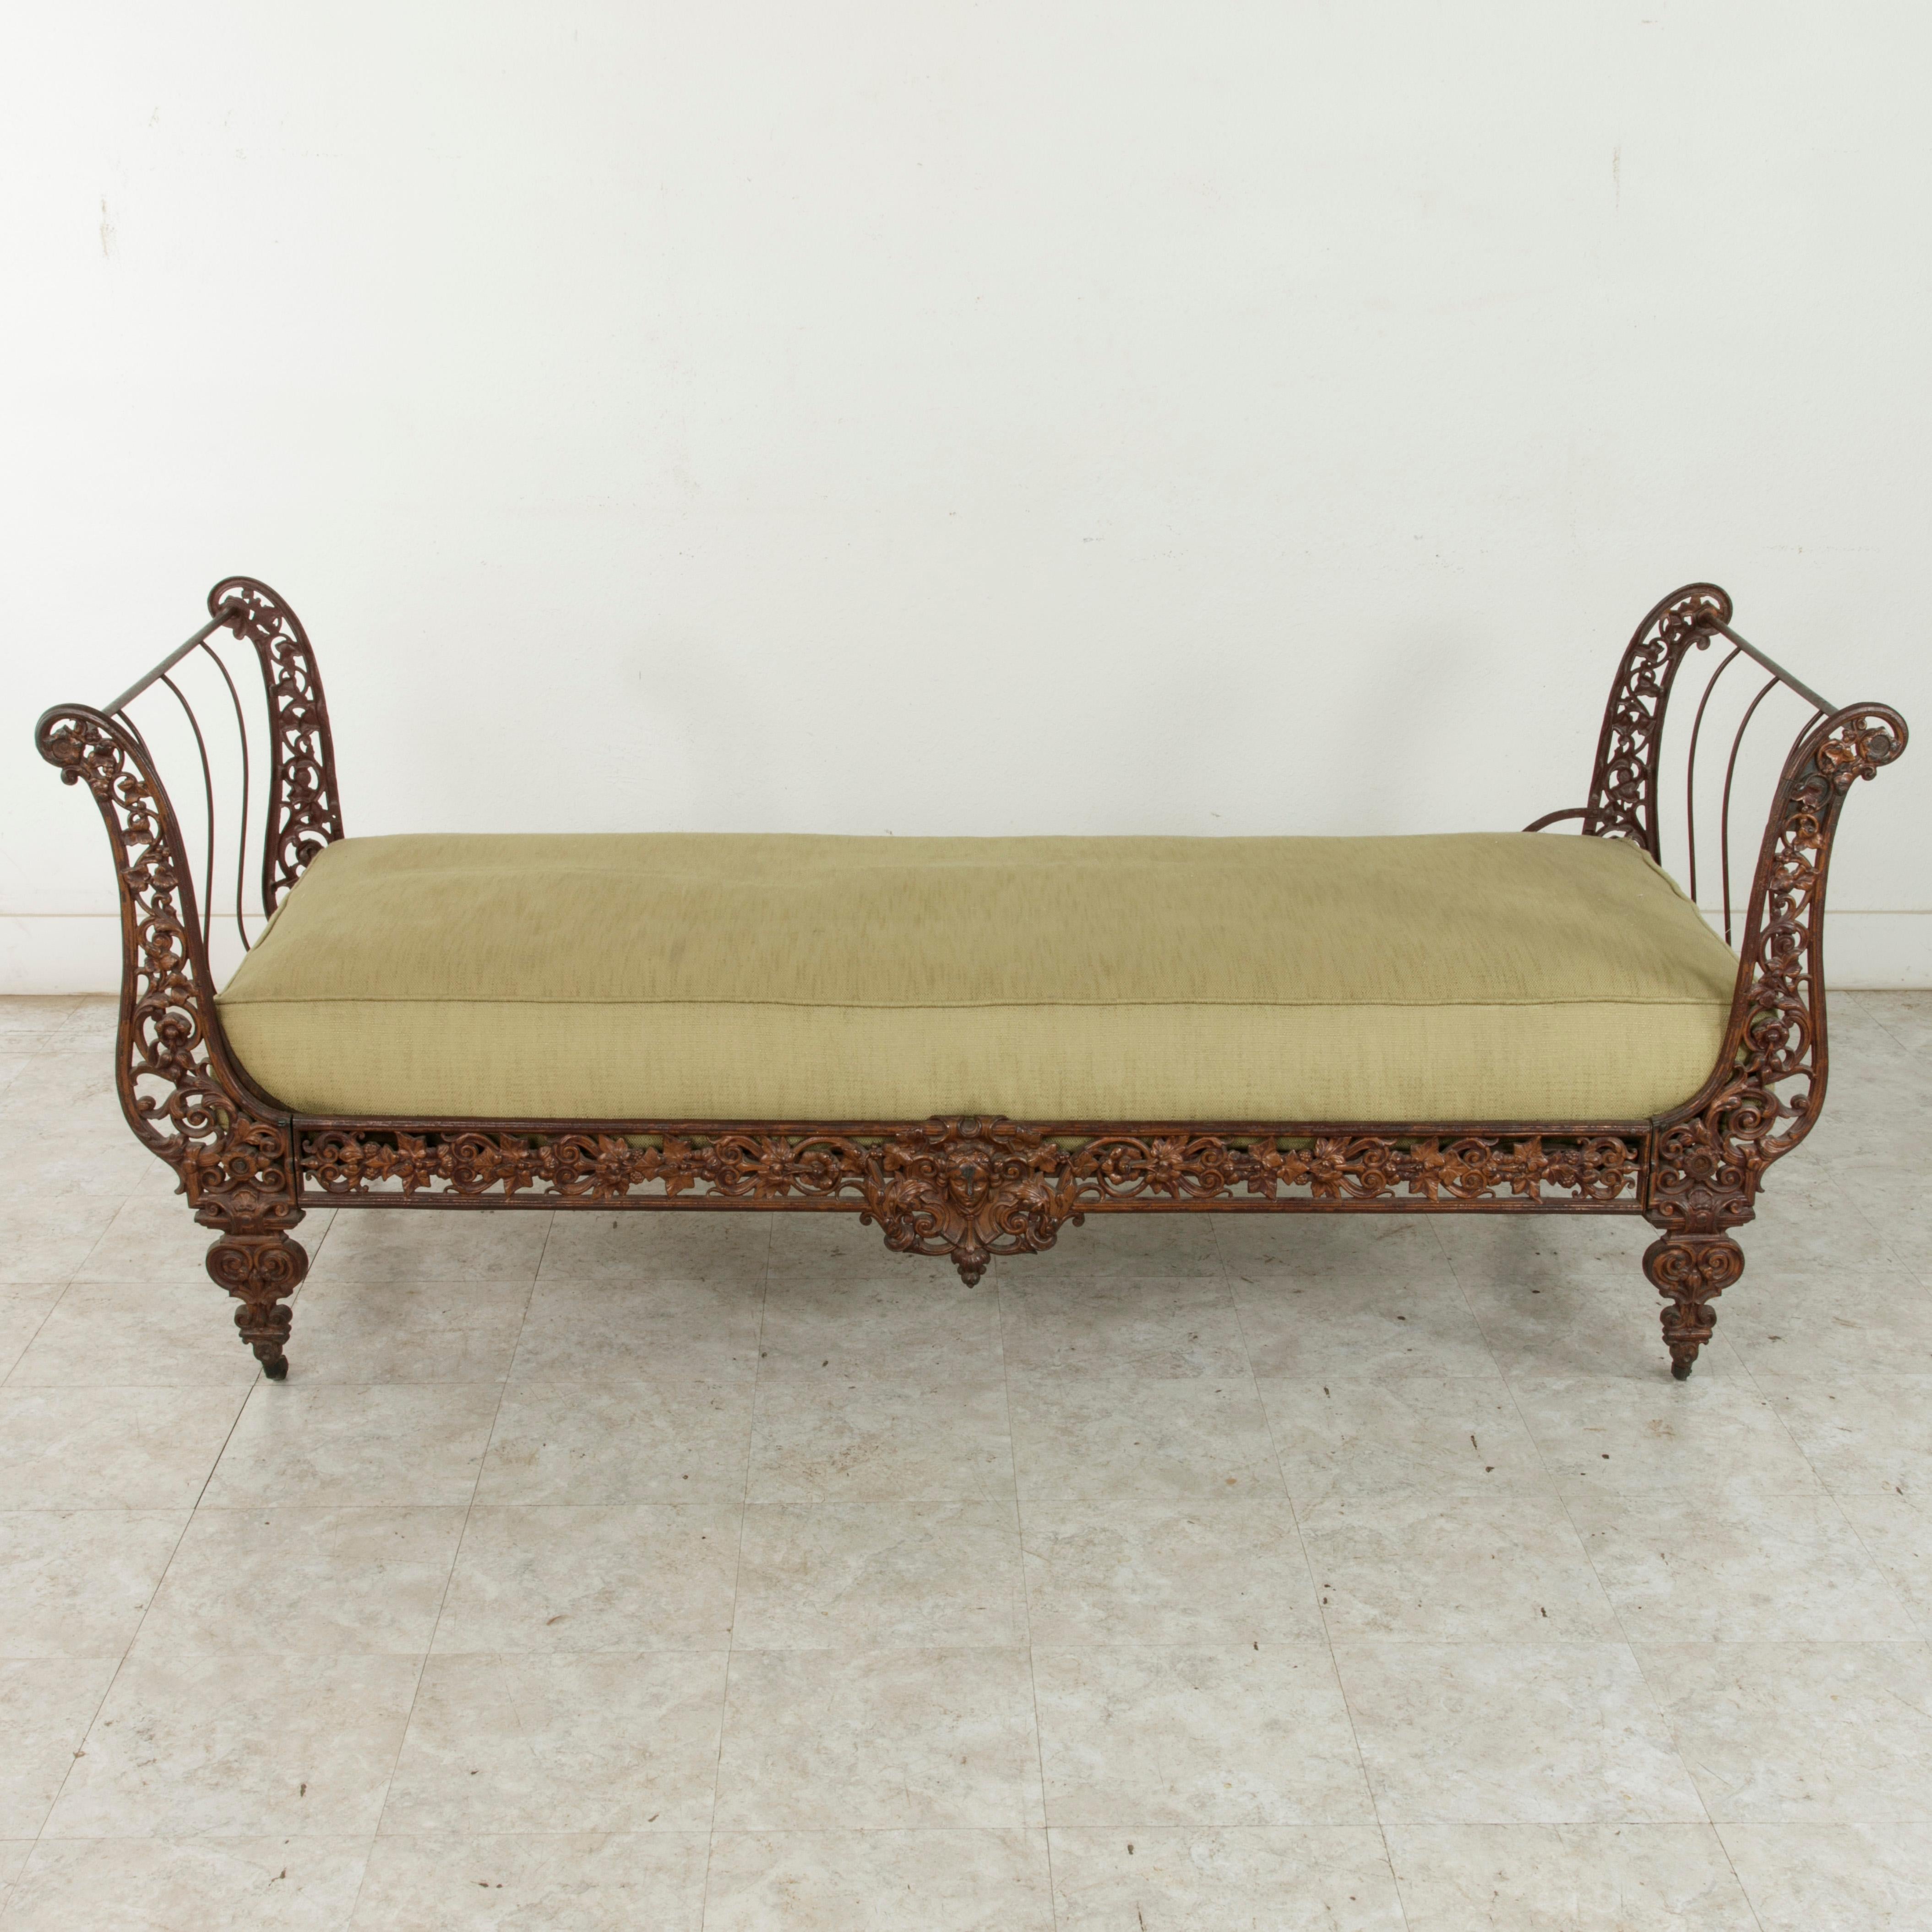 Upholstery 19th Century French Napoleon III Period Cast Iron Daybed or Sleigh Bed